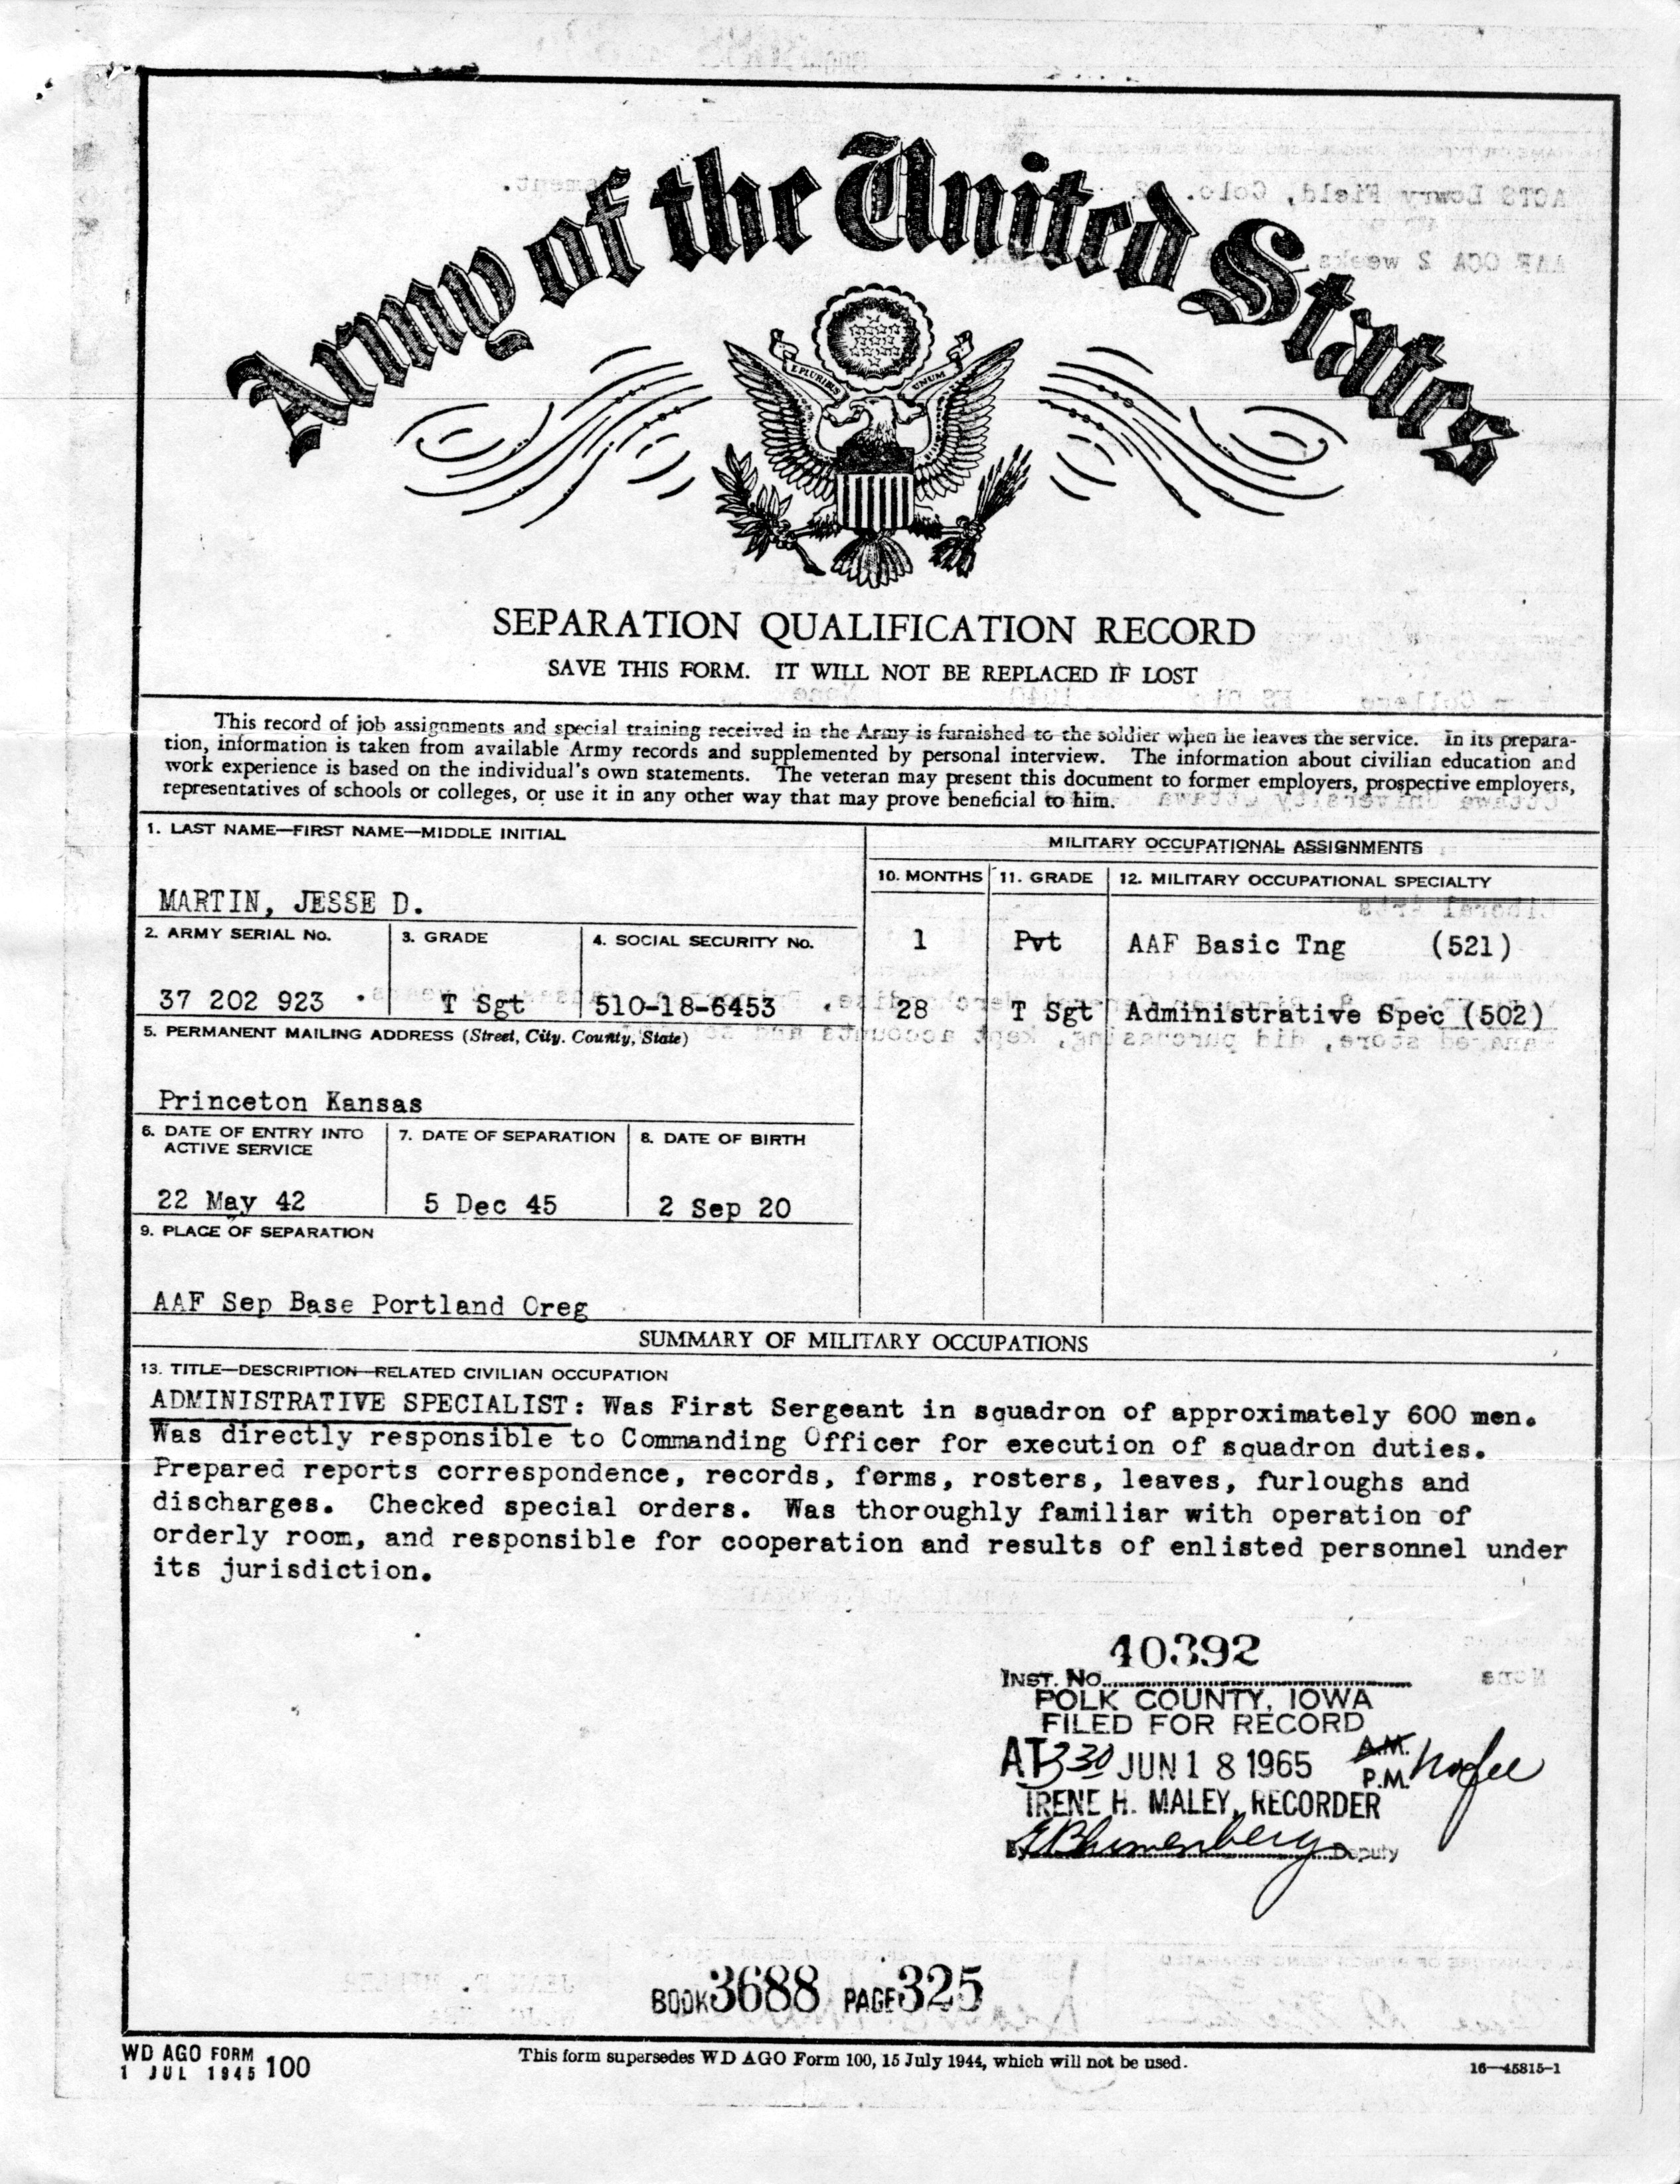 Jesse Dean Martin - US Army Seperation Qualification Record - page 1.jpg